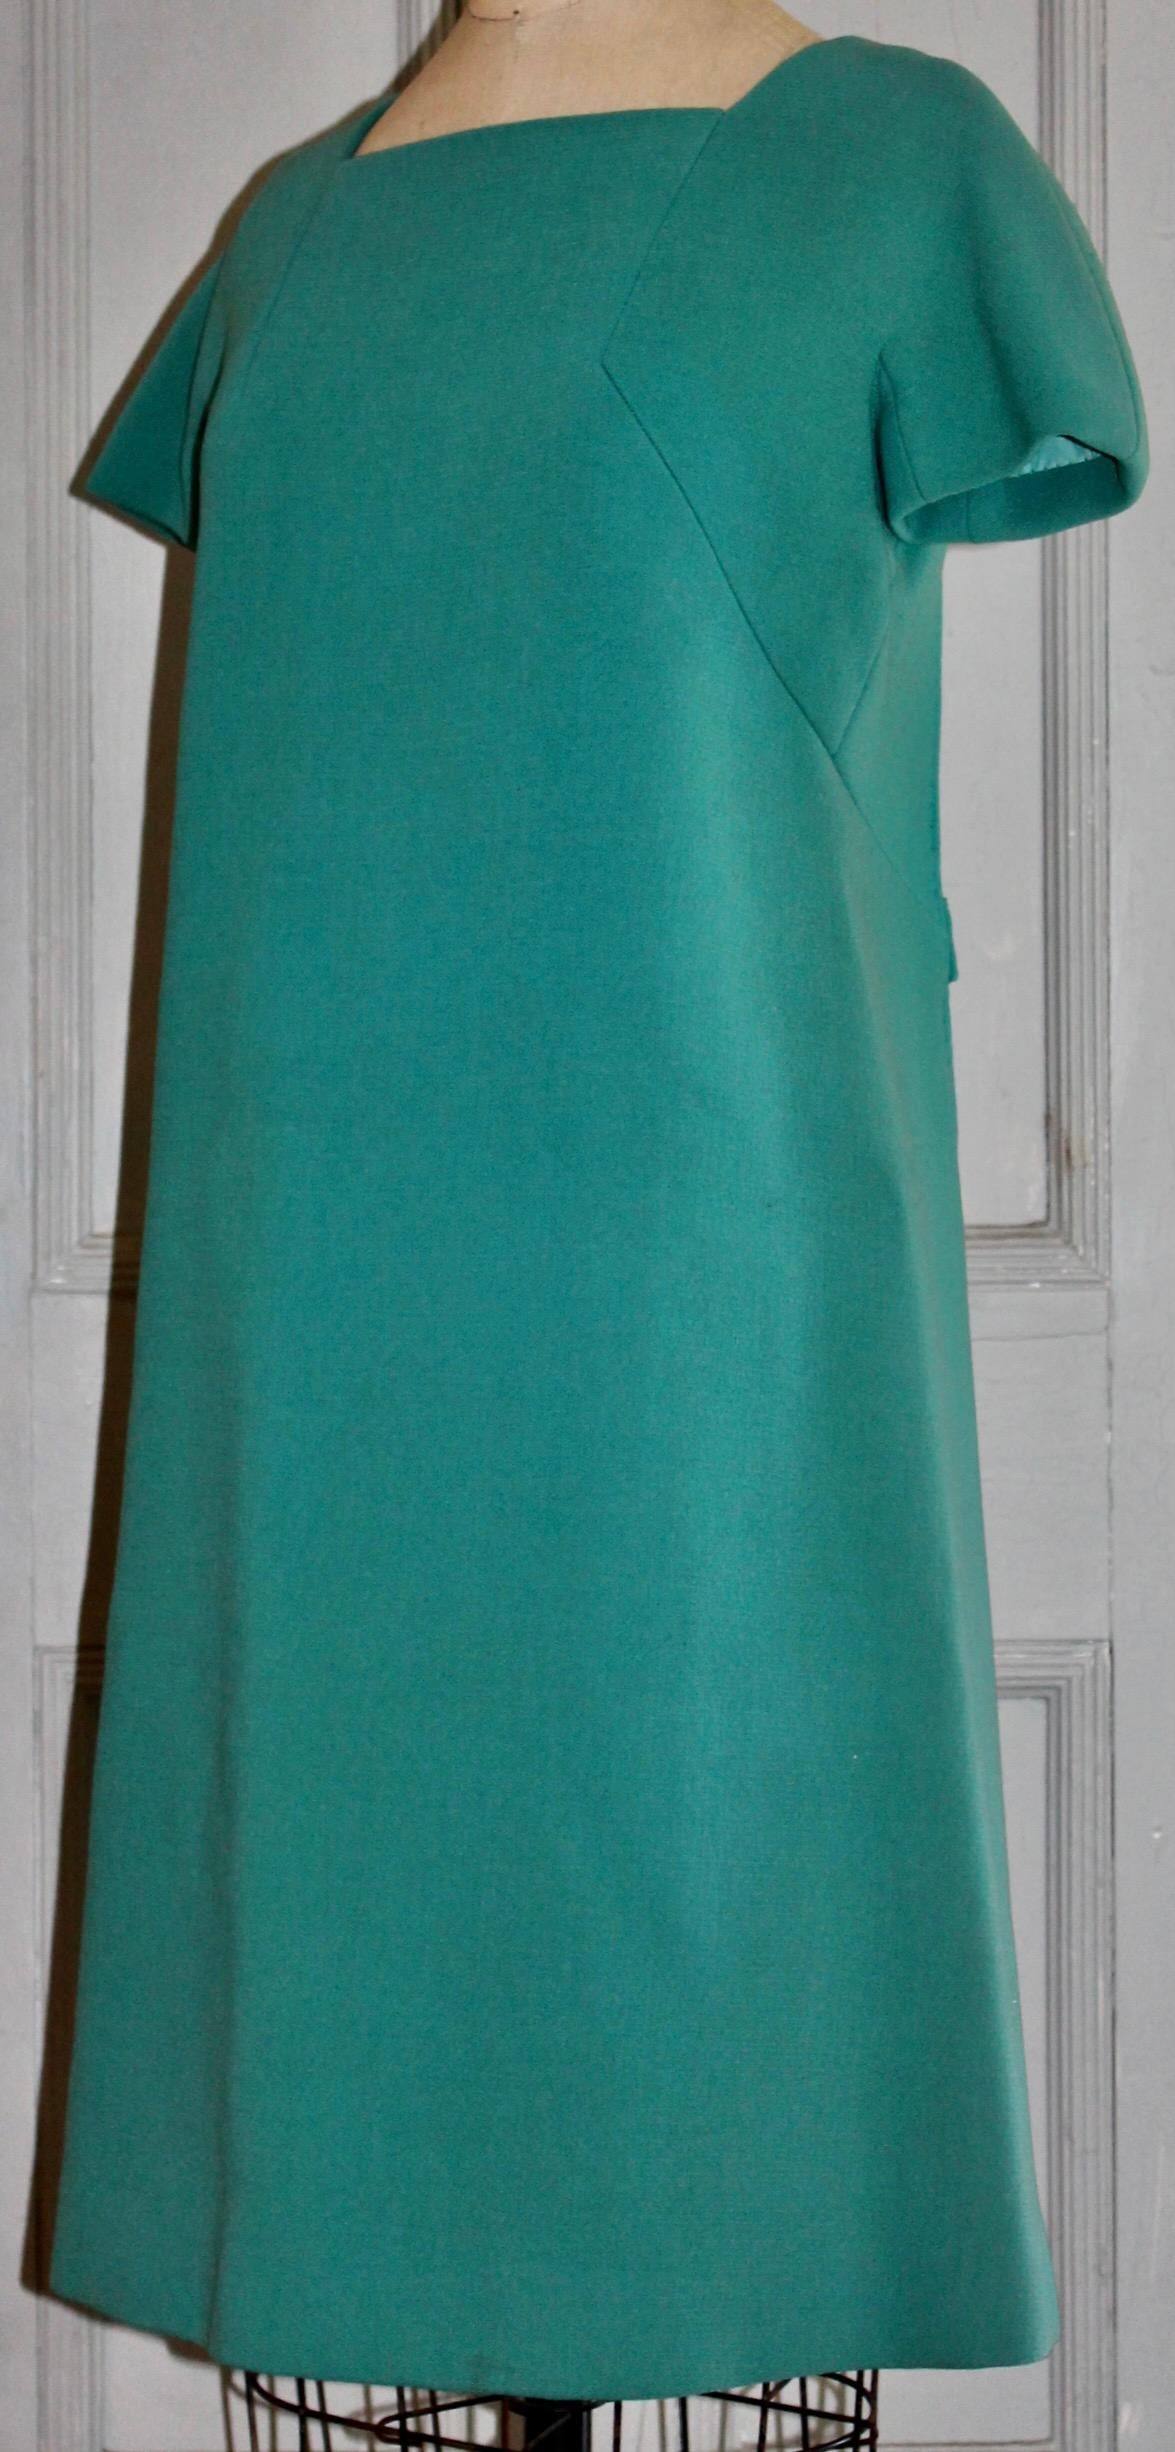 Jean Patou Paris Collection Boutique Green/Blue Day Dress In Good Condition For Sale In Sharon, CT